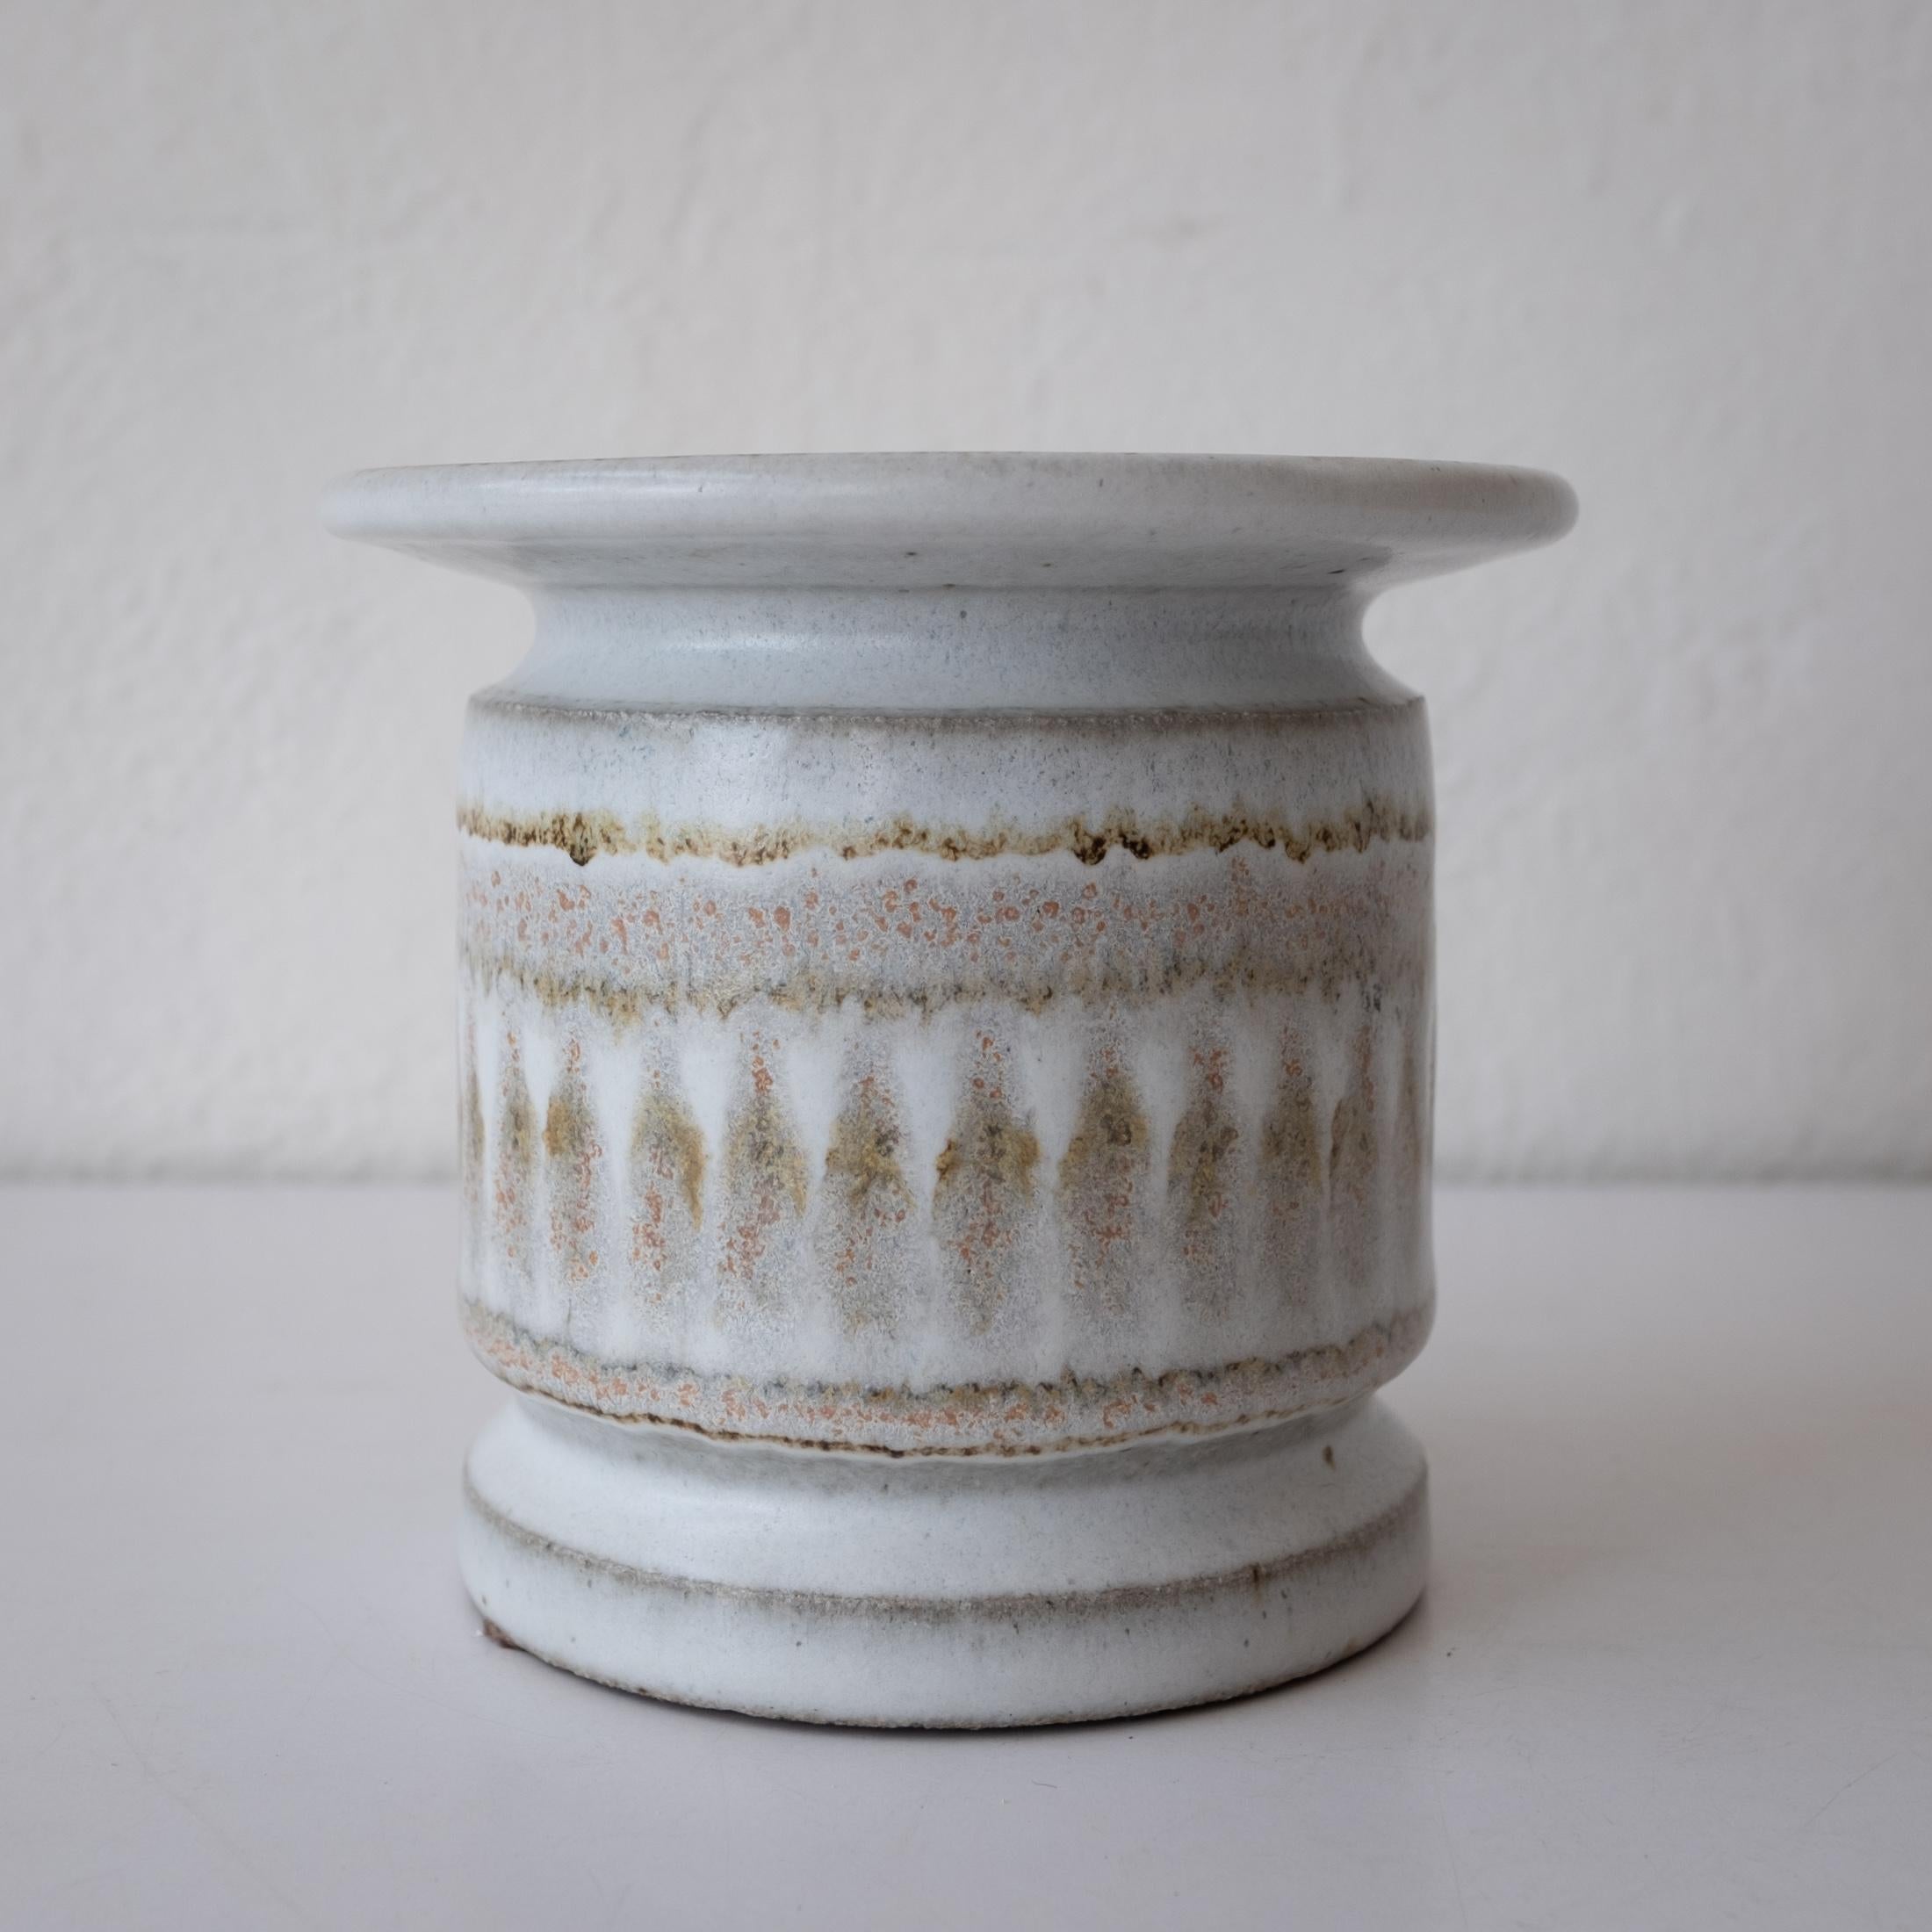 David Cressey and Robert Maxwell Earthgender Pottery Pedestal or Candle Holder 1